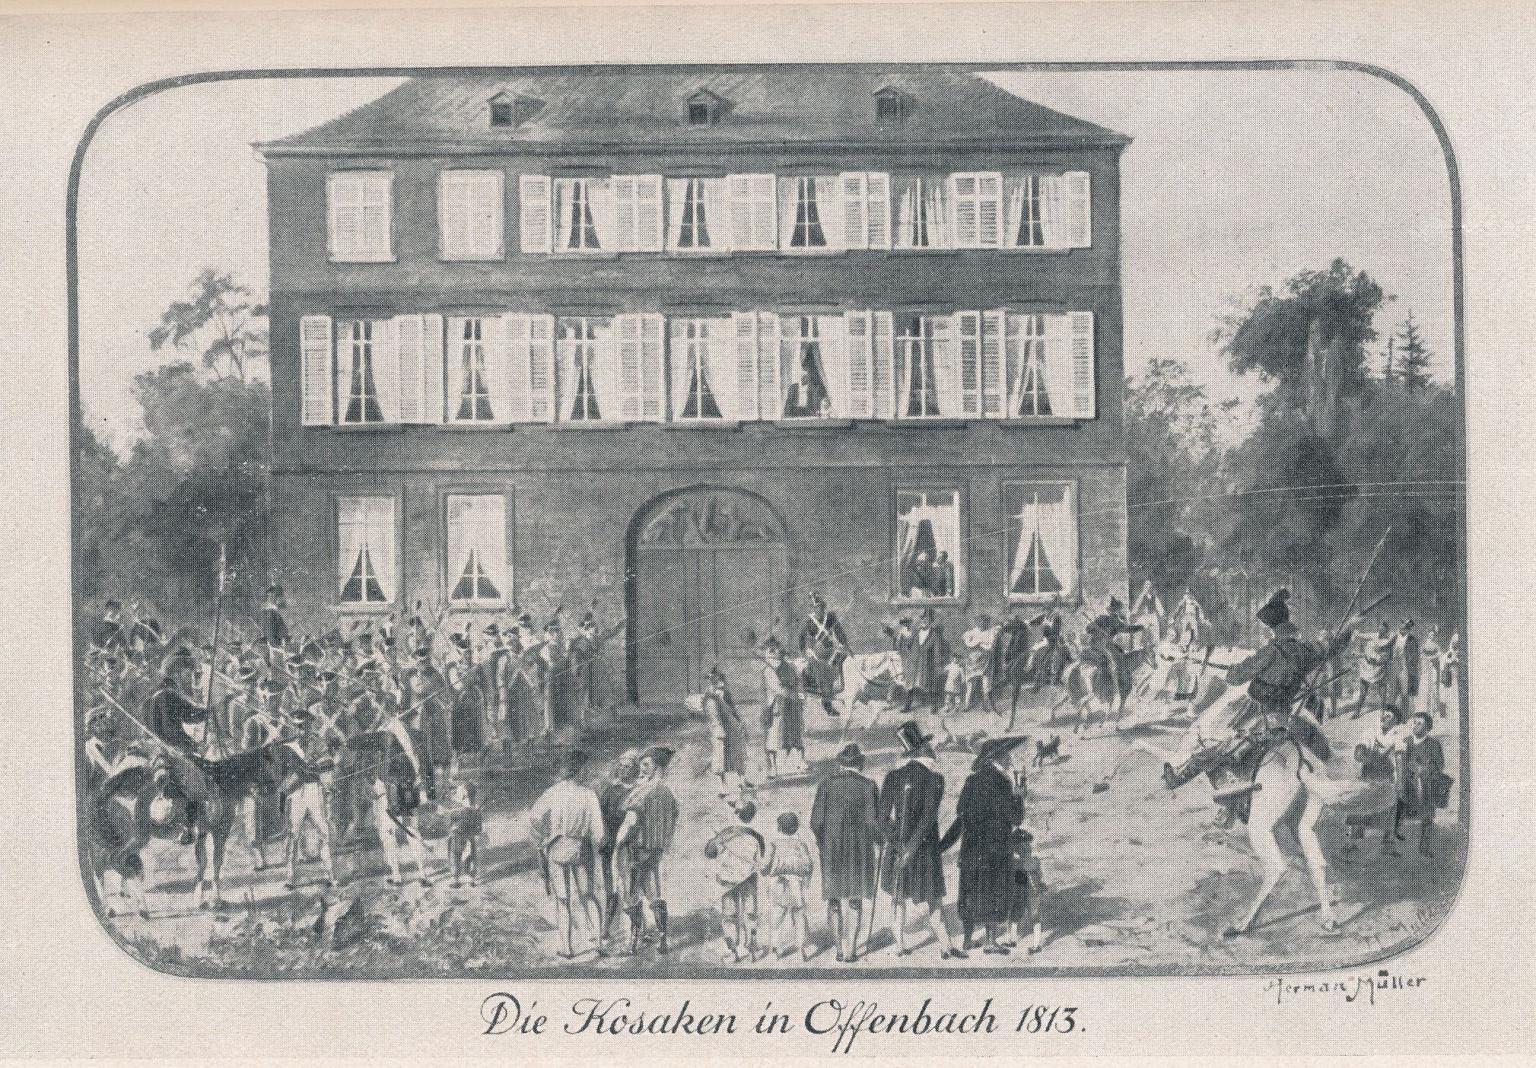 Image of house with many windows surrounded by soldiers on horseback and people. 